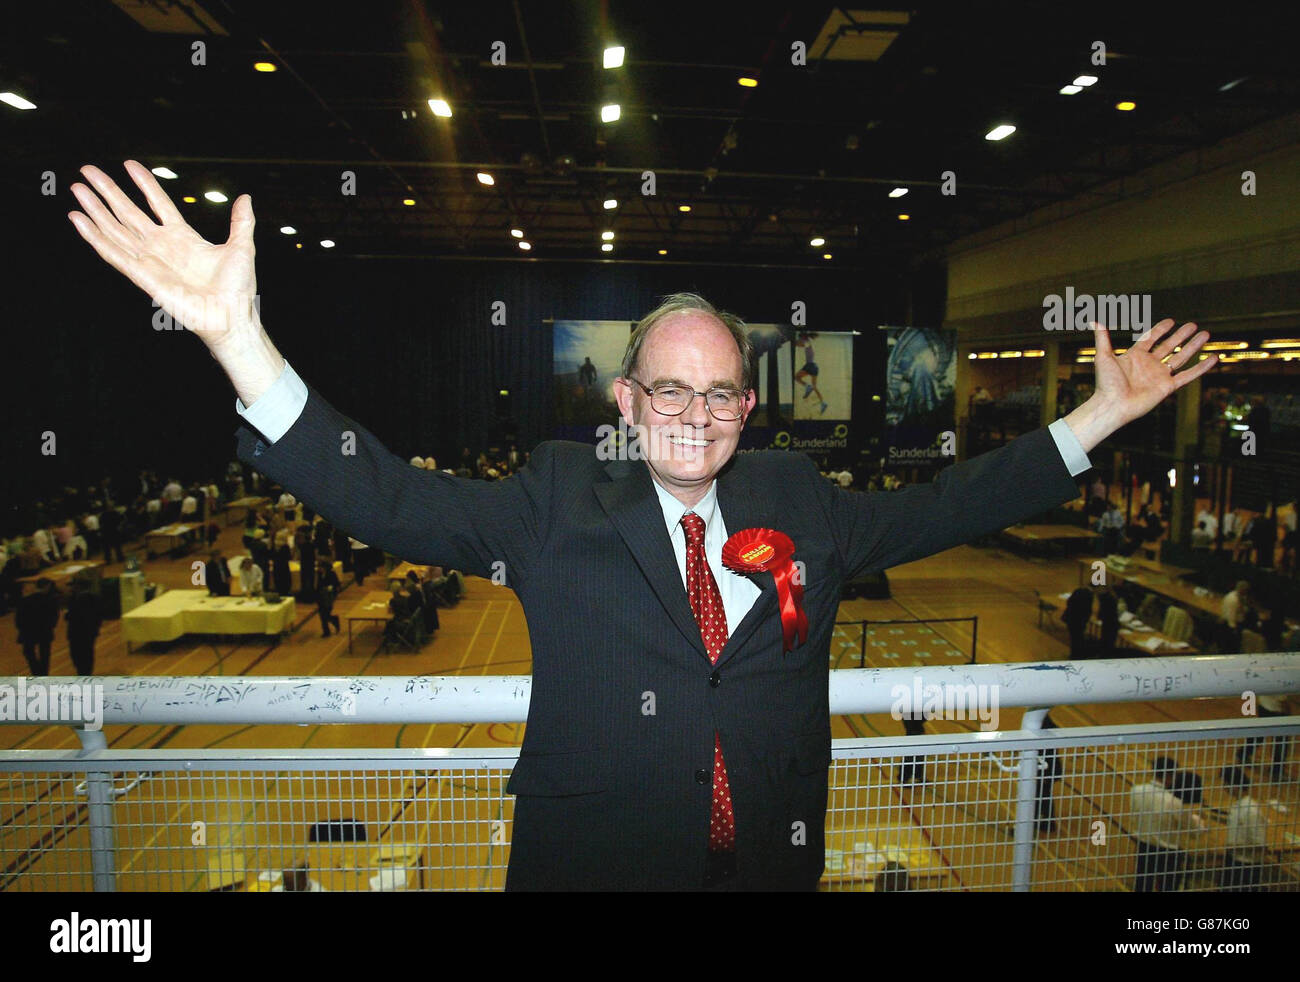 Labour candidate Christopher John Mullin celebrates taking the seat of Sunderland South, in the time of 43mins 30 secs, with a majority 13,667, after the count at Crowtree Leisure Centre. Stock Photo